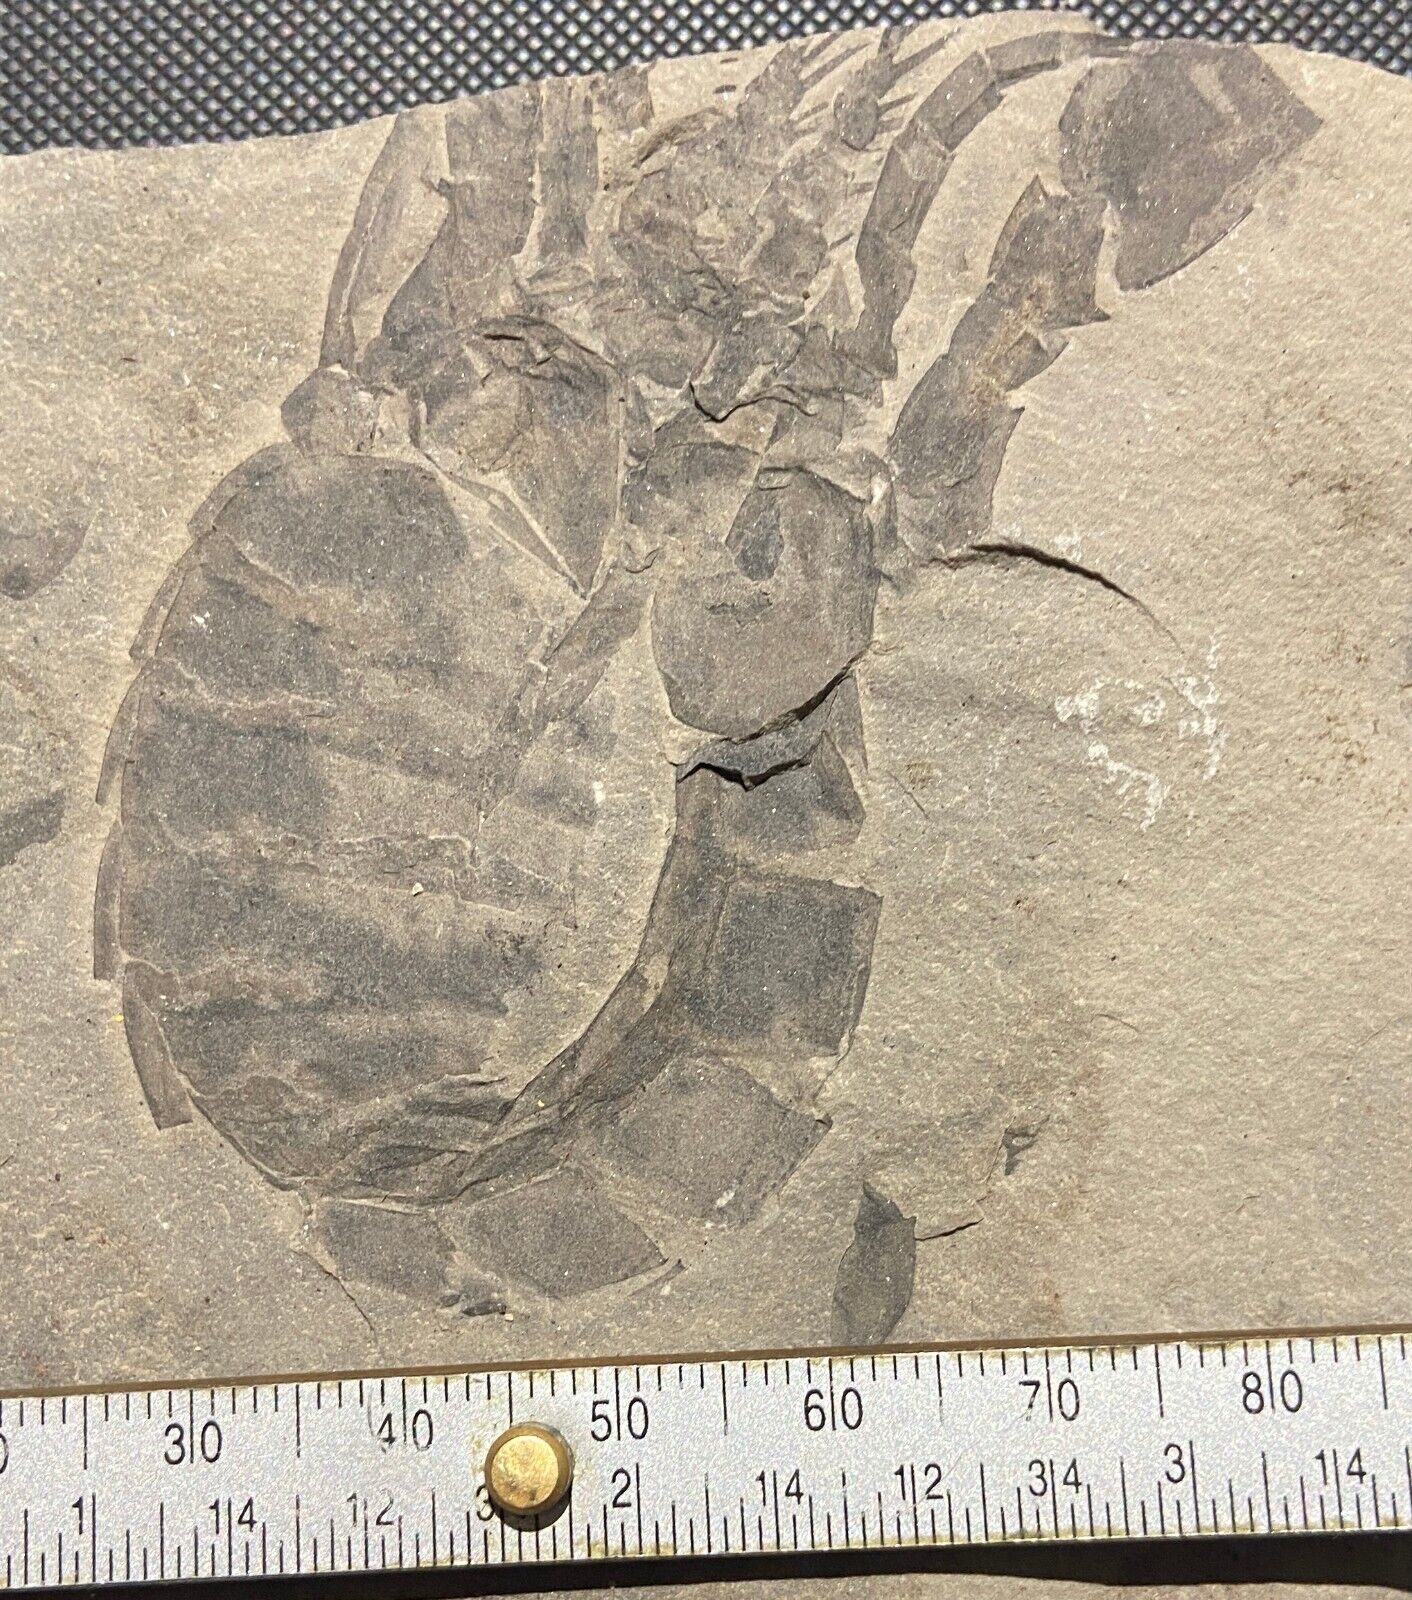 Eurypterid fossil - Eurypterus remipes - Silurian - Fiddlers Green, Herkimer, NY